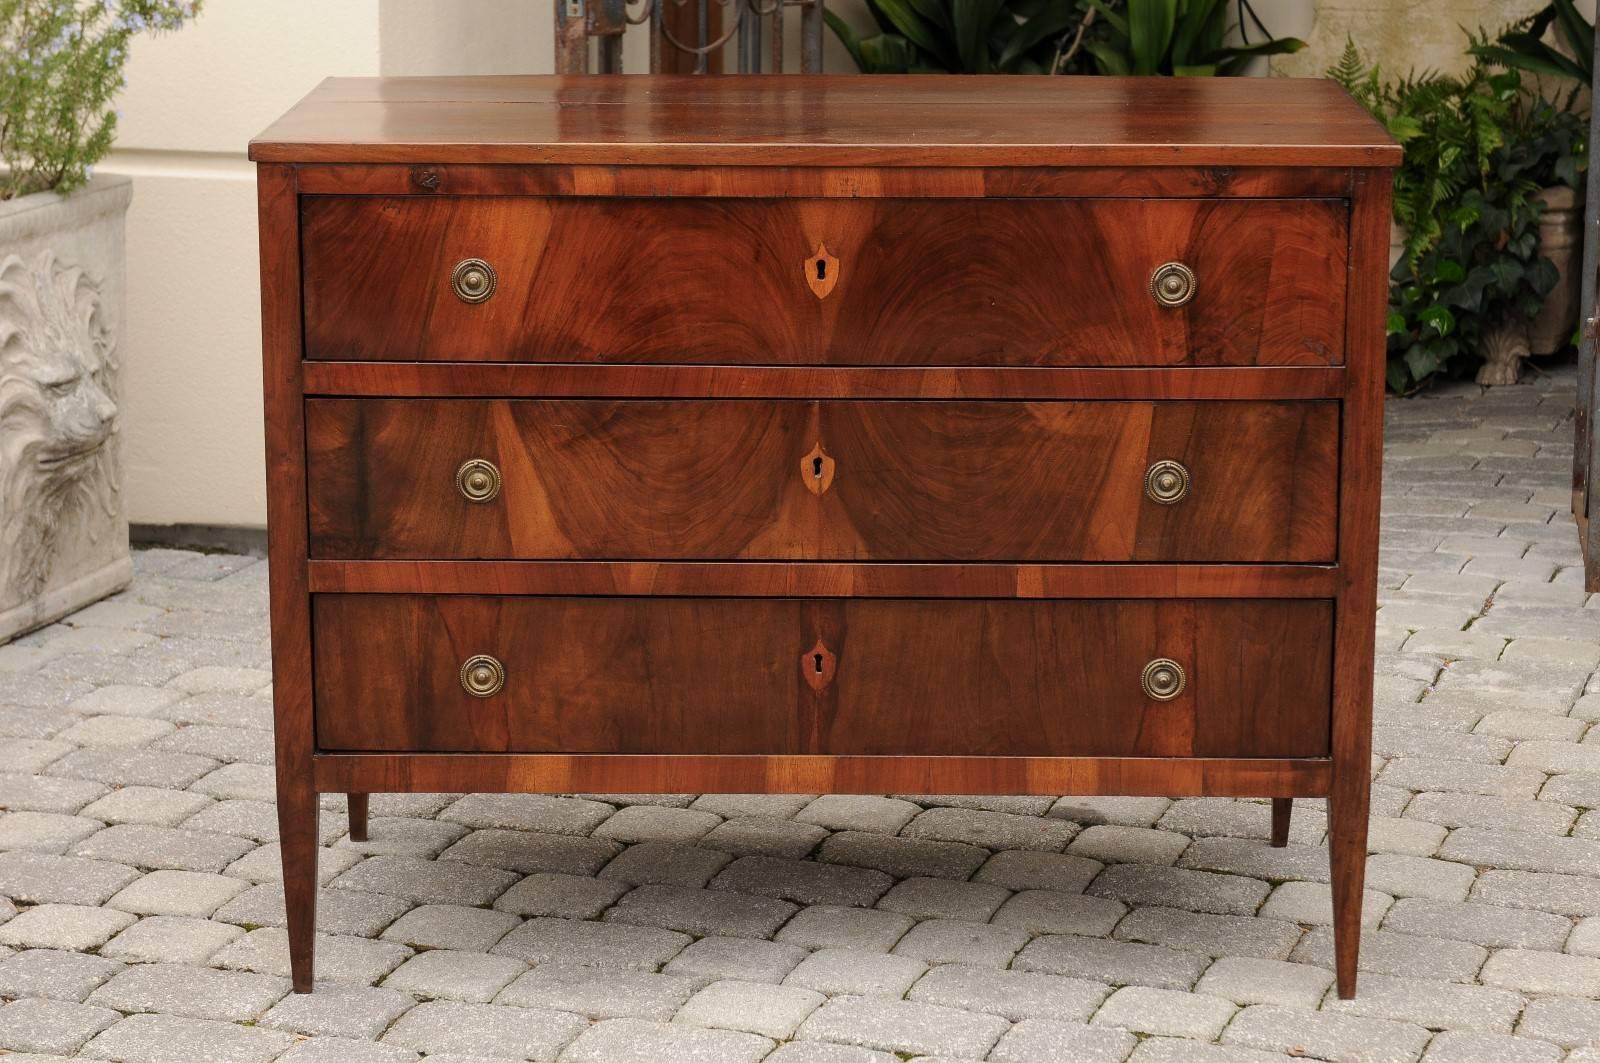 This Italian commode from the early 19th century features a rectangular top over three drawers. The exquisite pattern of the oyster veneer contrasts nicely with the simplicity of the lines. This Italian three-drawer chest from circa 1820 has indeed